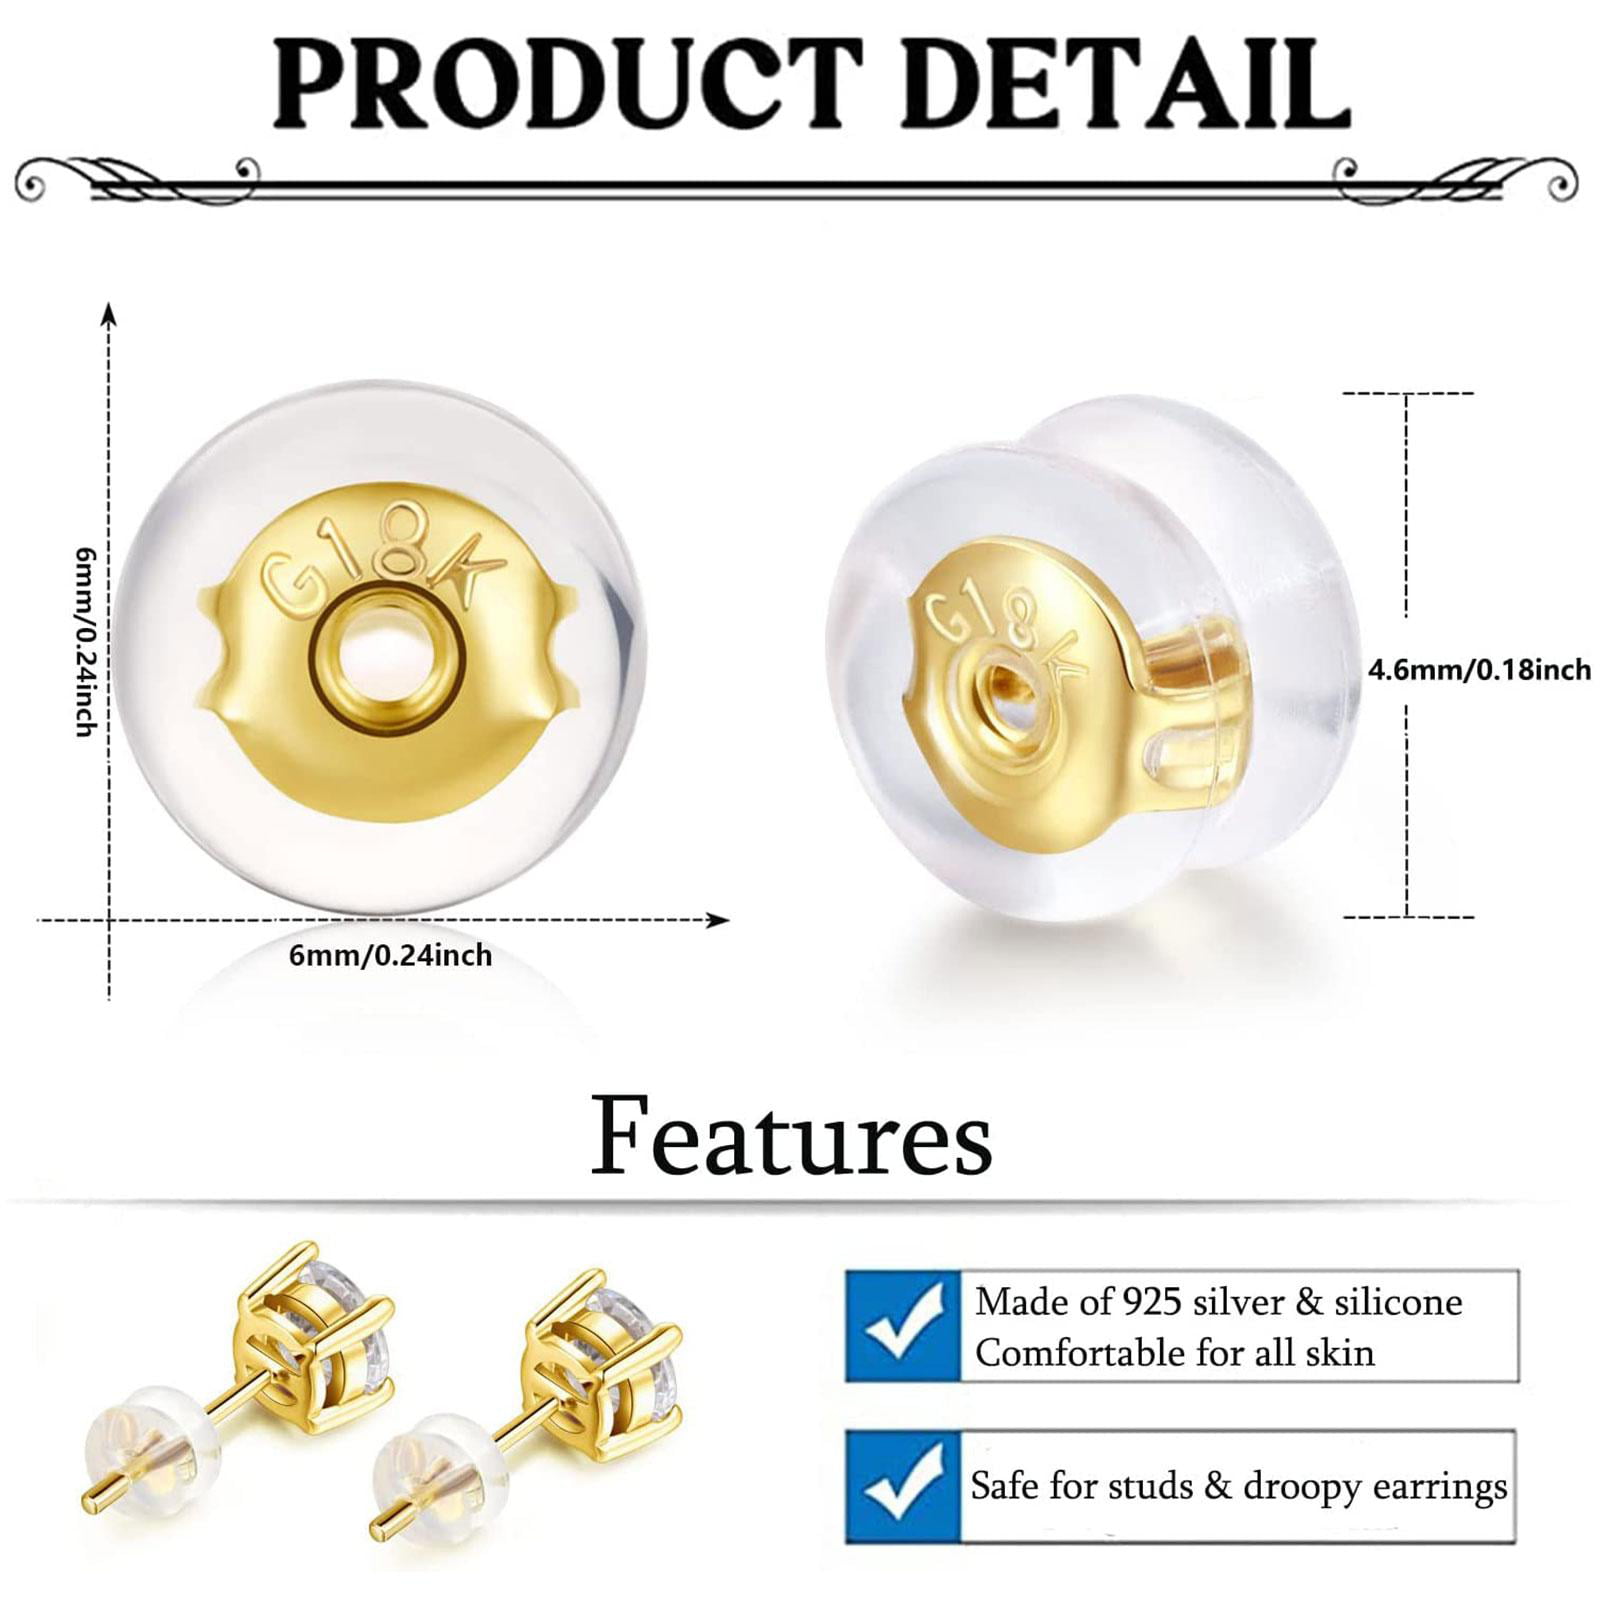 Gold Locking Secure Earring Backs for Studs, Silicone Earring Backs  Replacements for Studs/Droopy Ears, No-Irritate Hypoallergenice Earring  Backs for Adults&Kids 